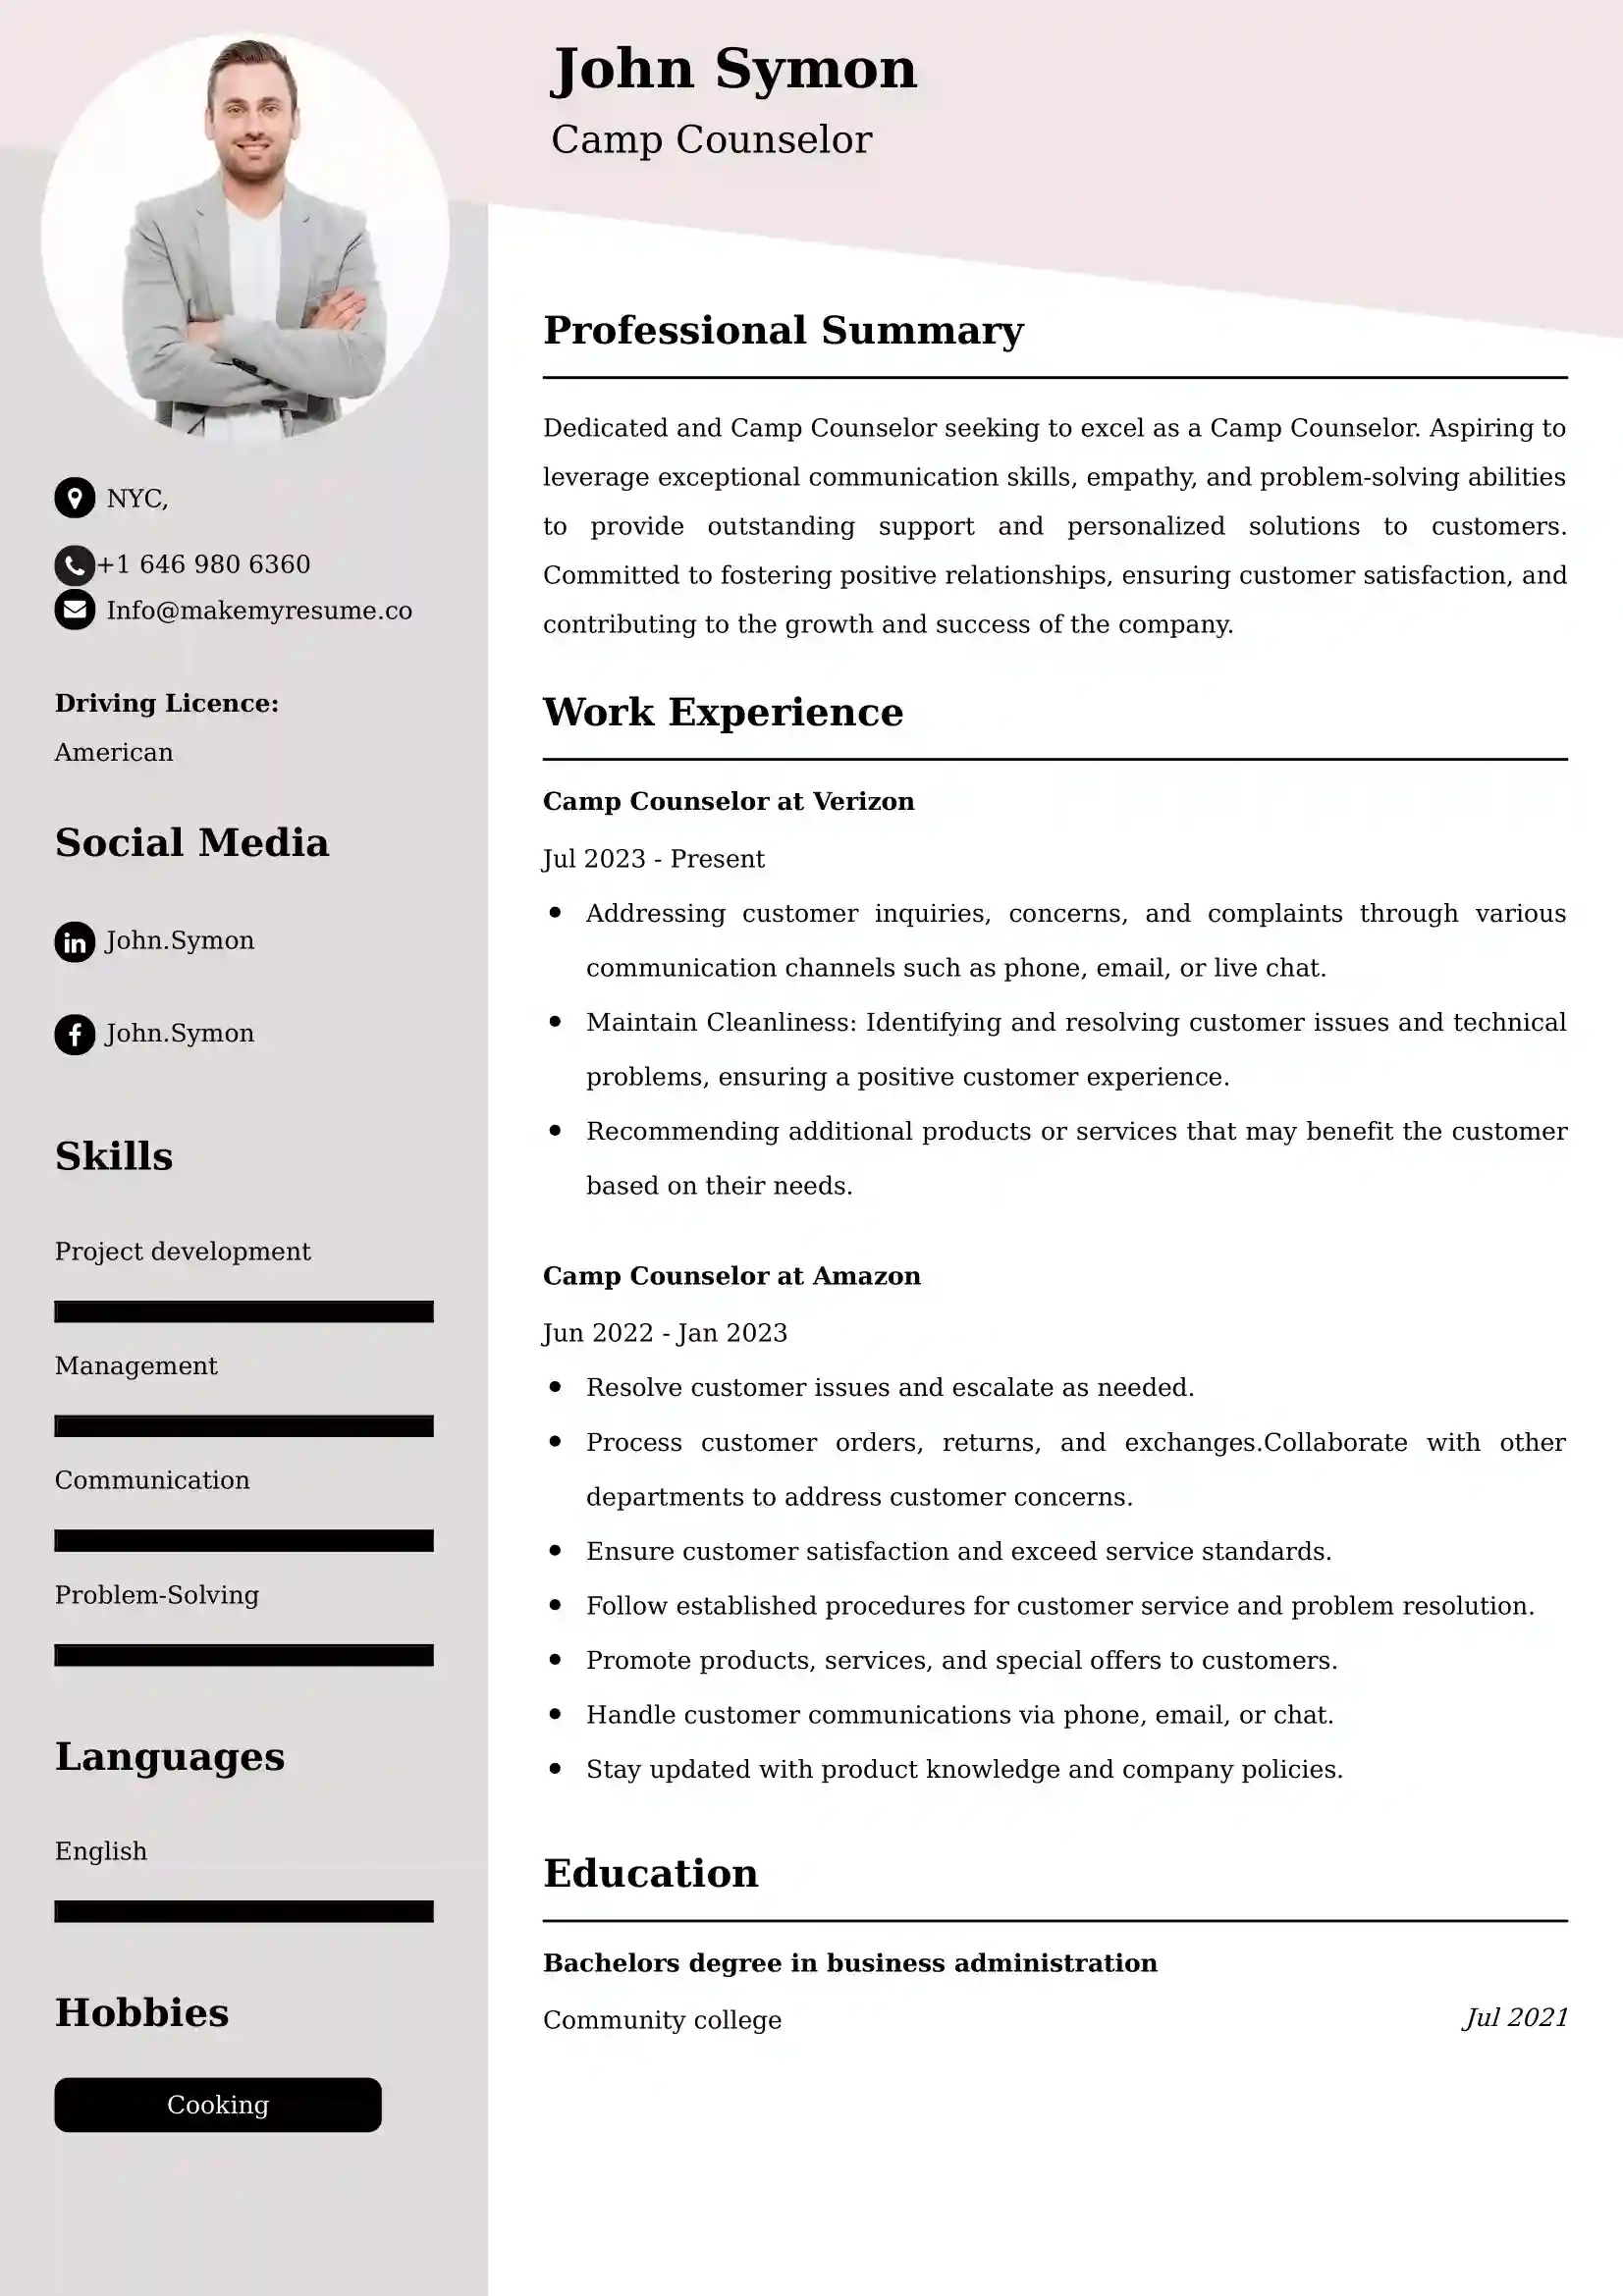 Camp Counselor Resume Examples - Australian Format and Tips